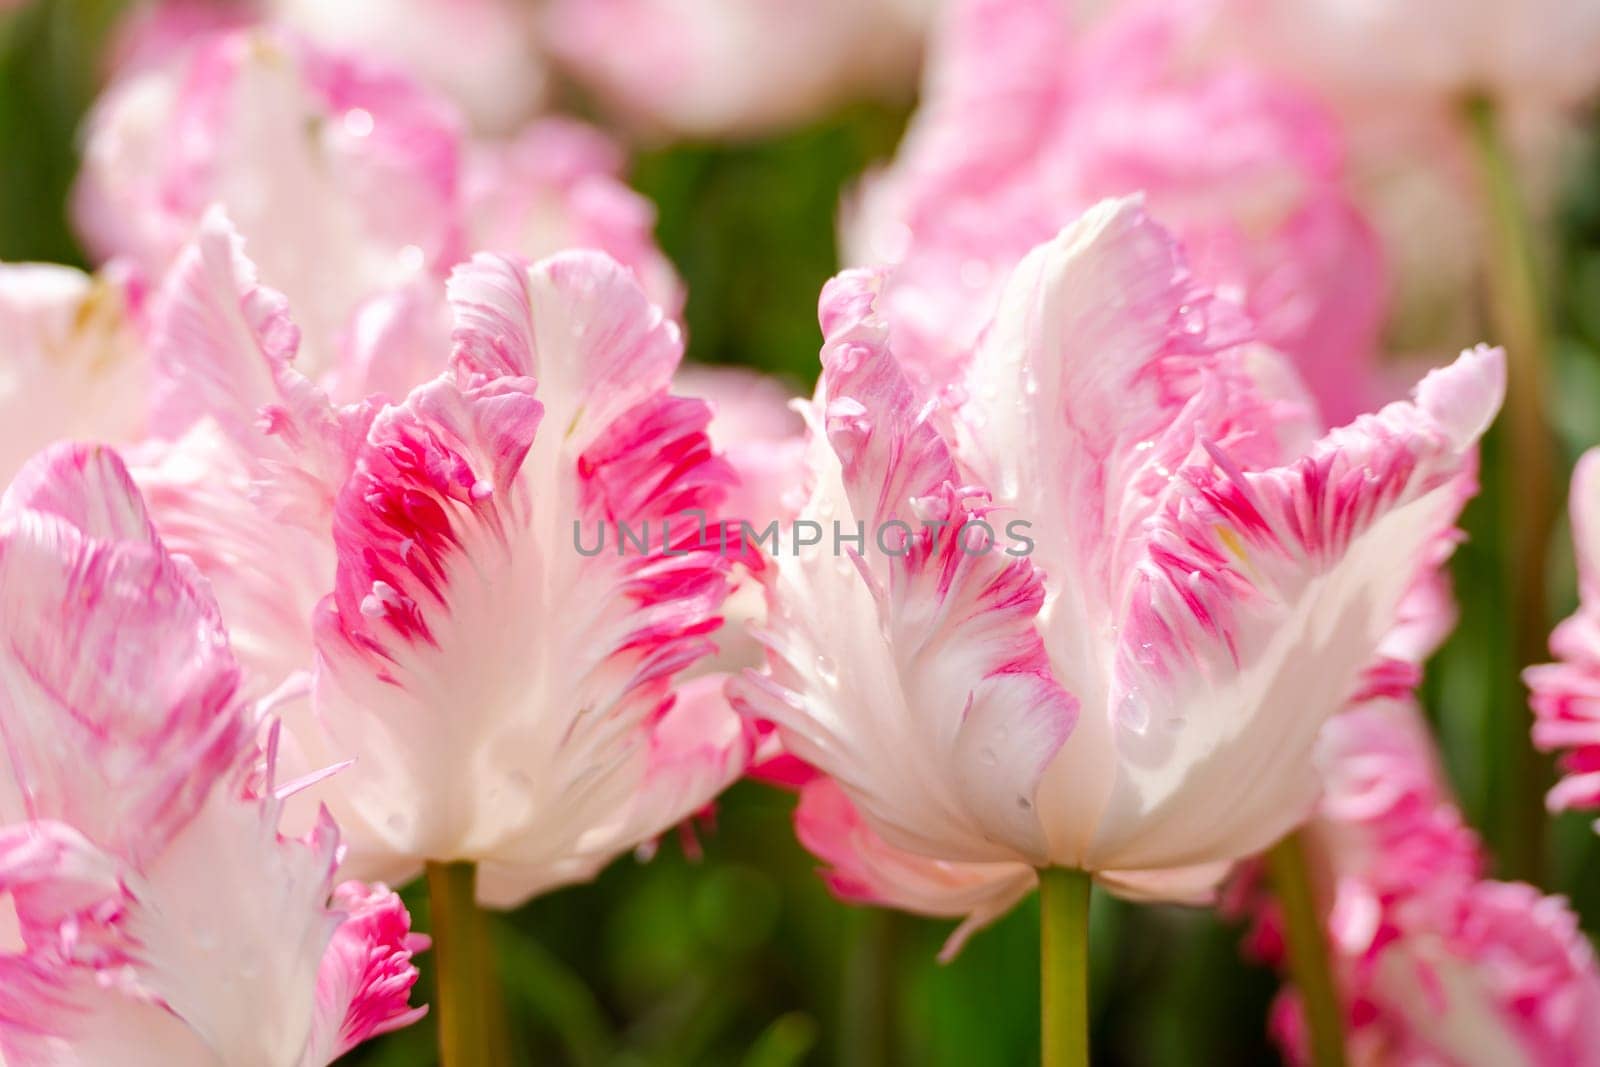 Tulip field. Pink tulips with white stripe close-up. Growing flowers in spring. by Matiunina